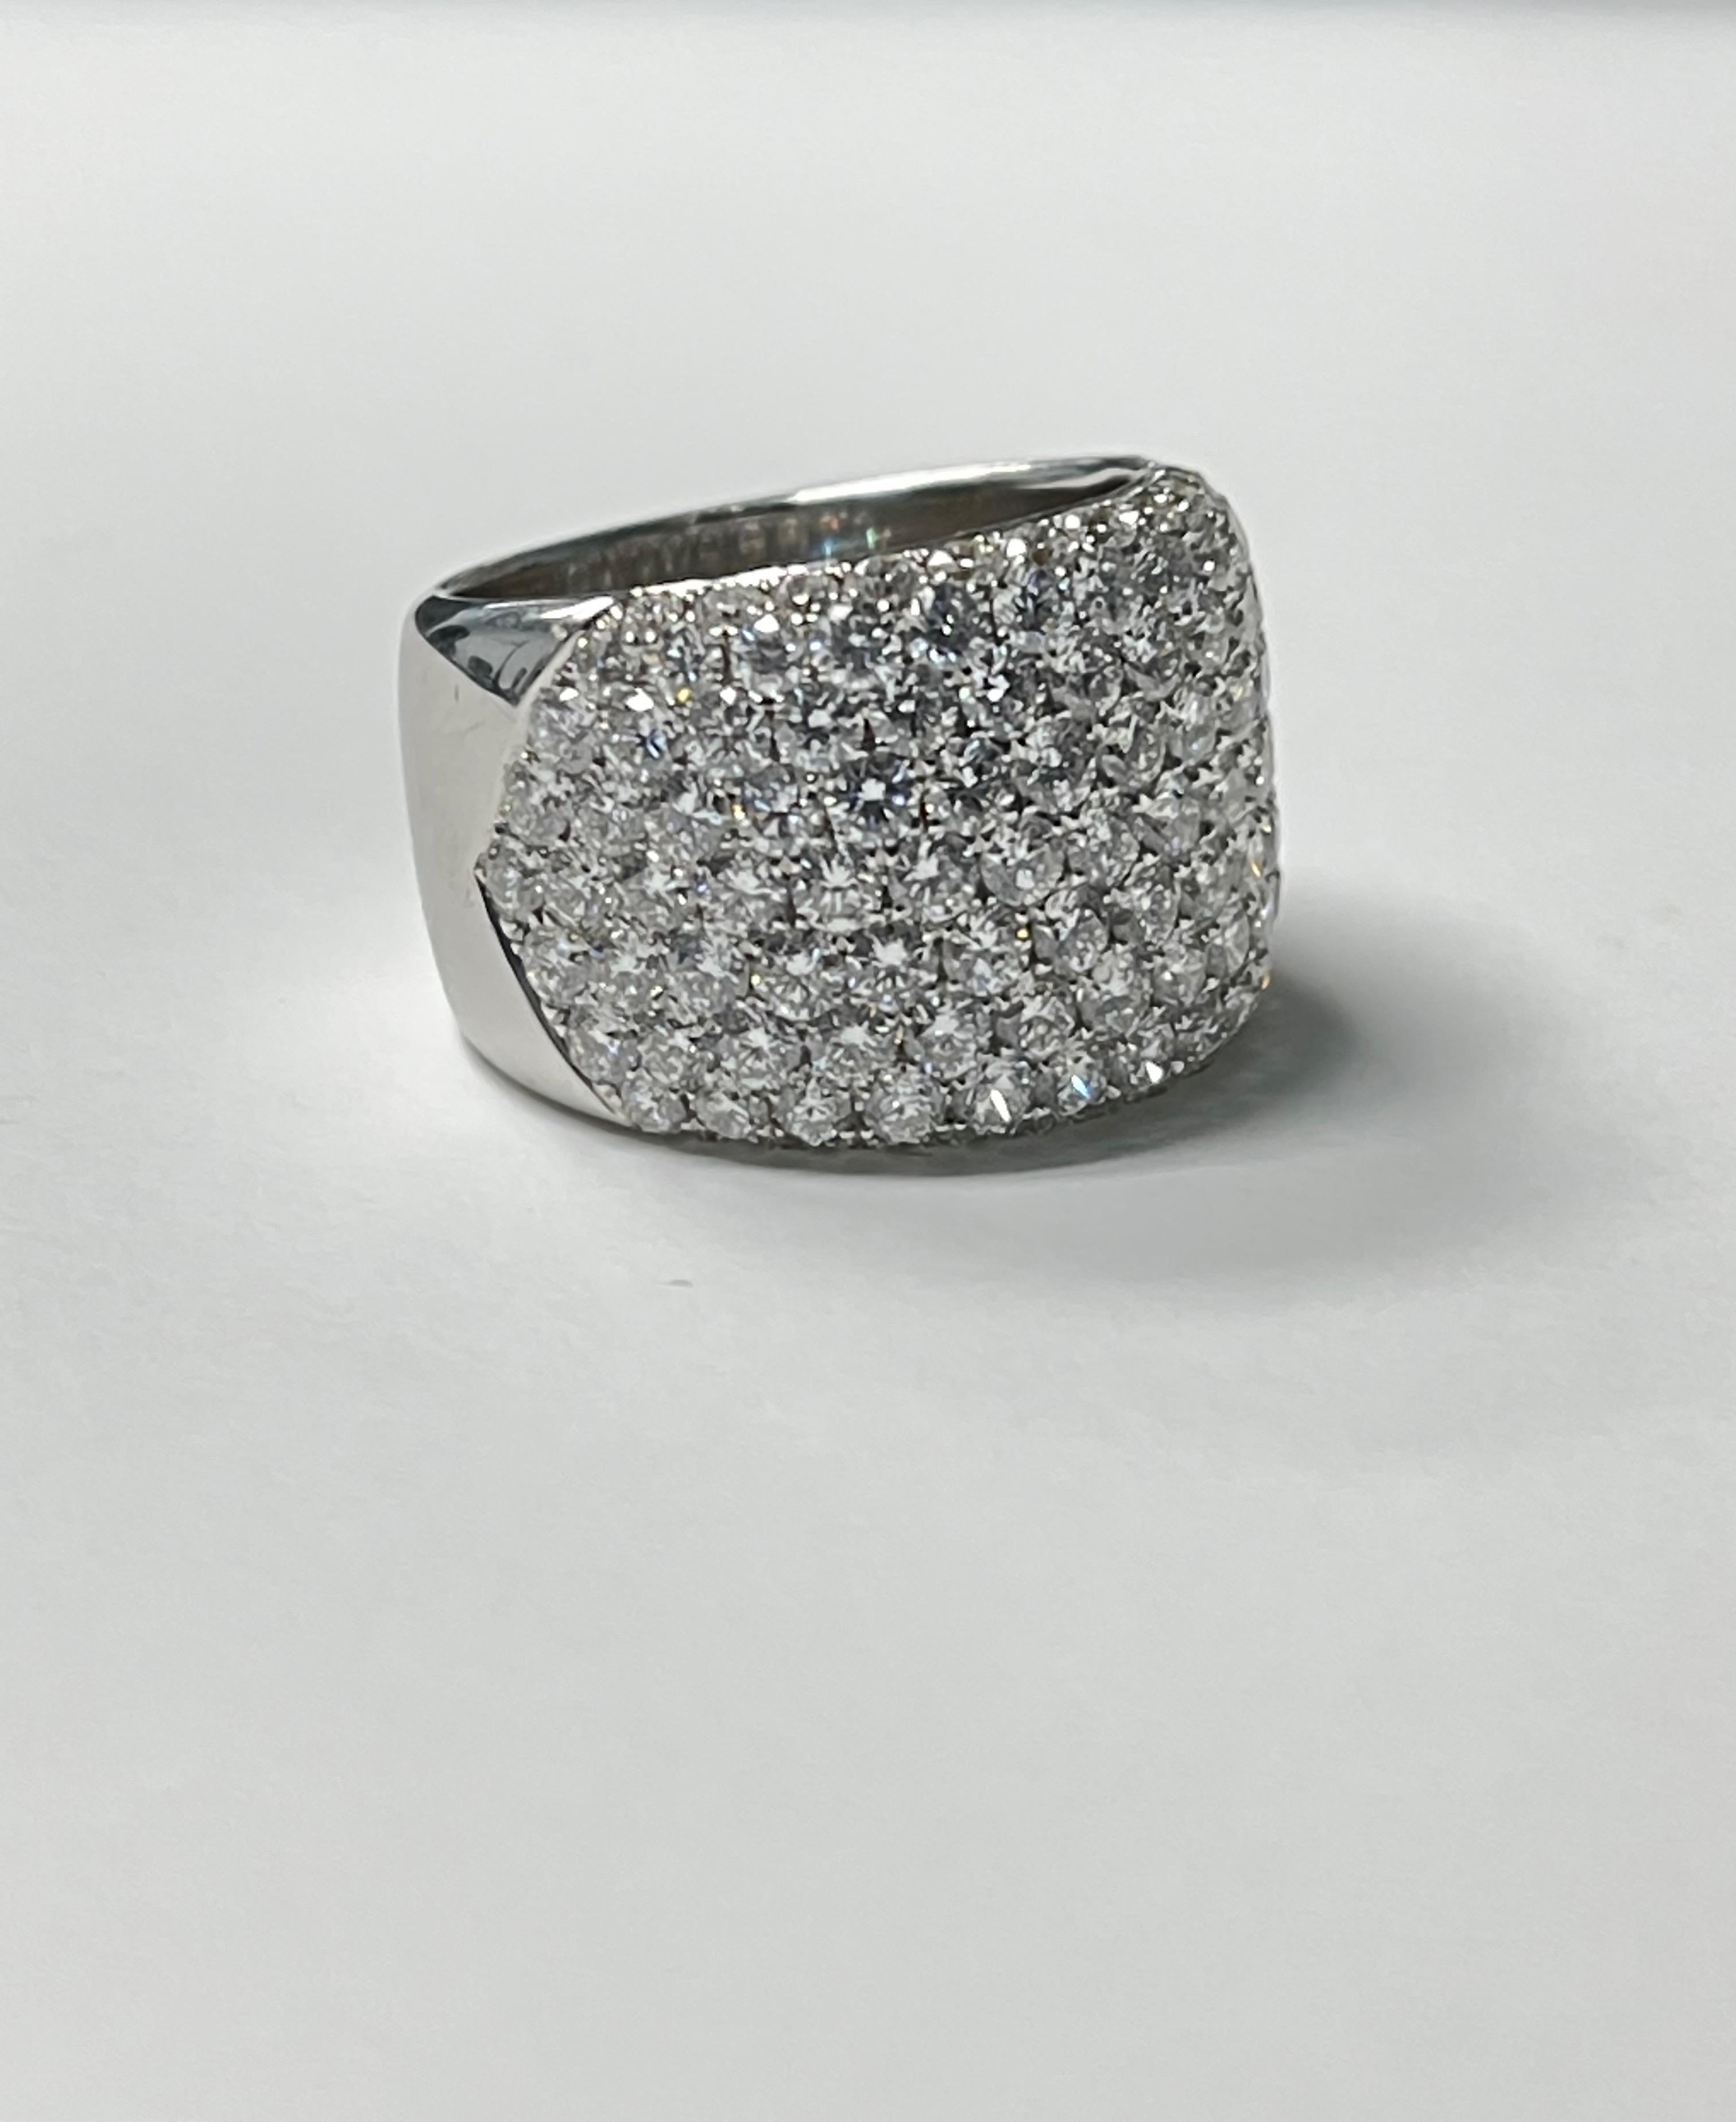 4.34 Carat White Diamond Pave Set Ring in 18K White Gold In New Condition For Sale In New York, NY